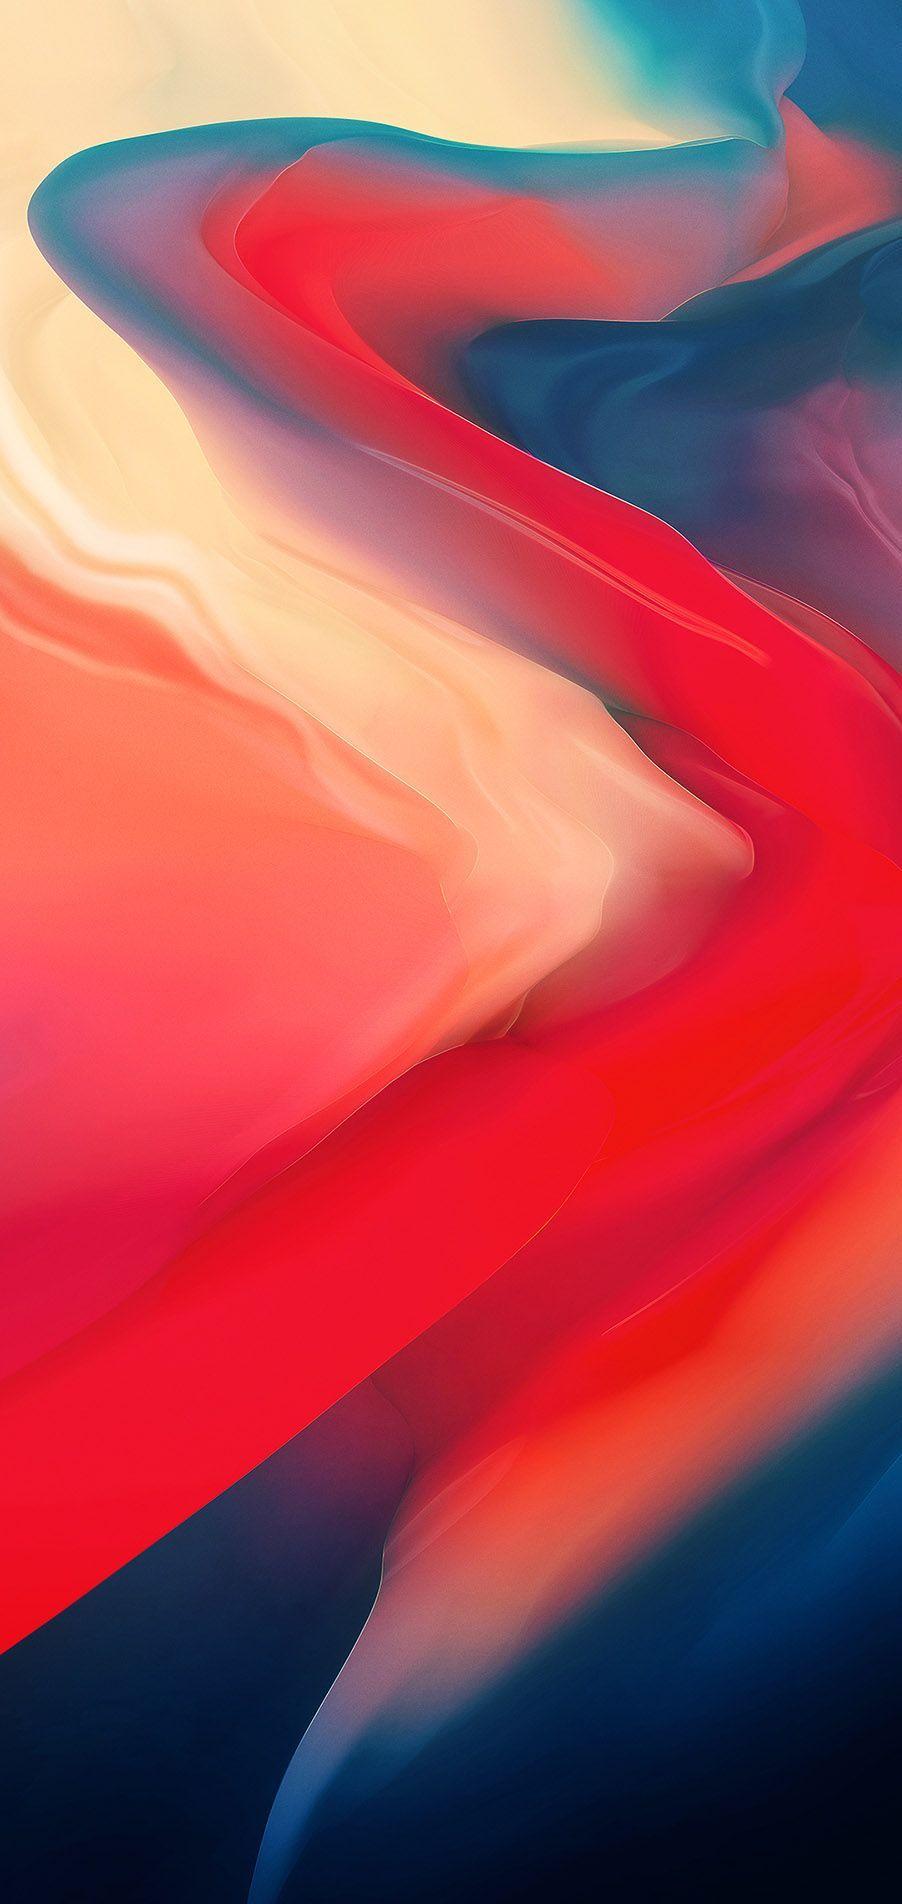 OnePlus 6 Wallpaper. Abstract iphone wallpaper, Painting